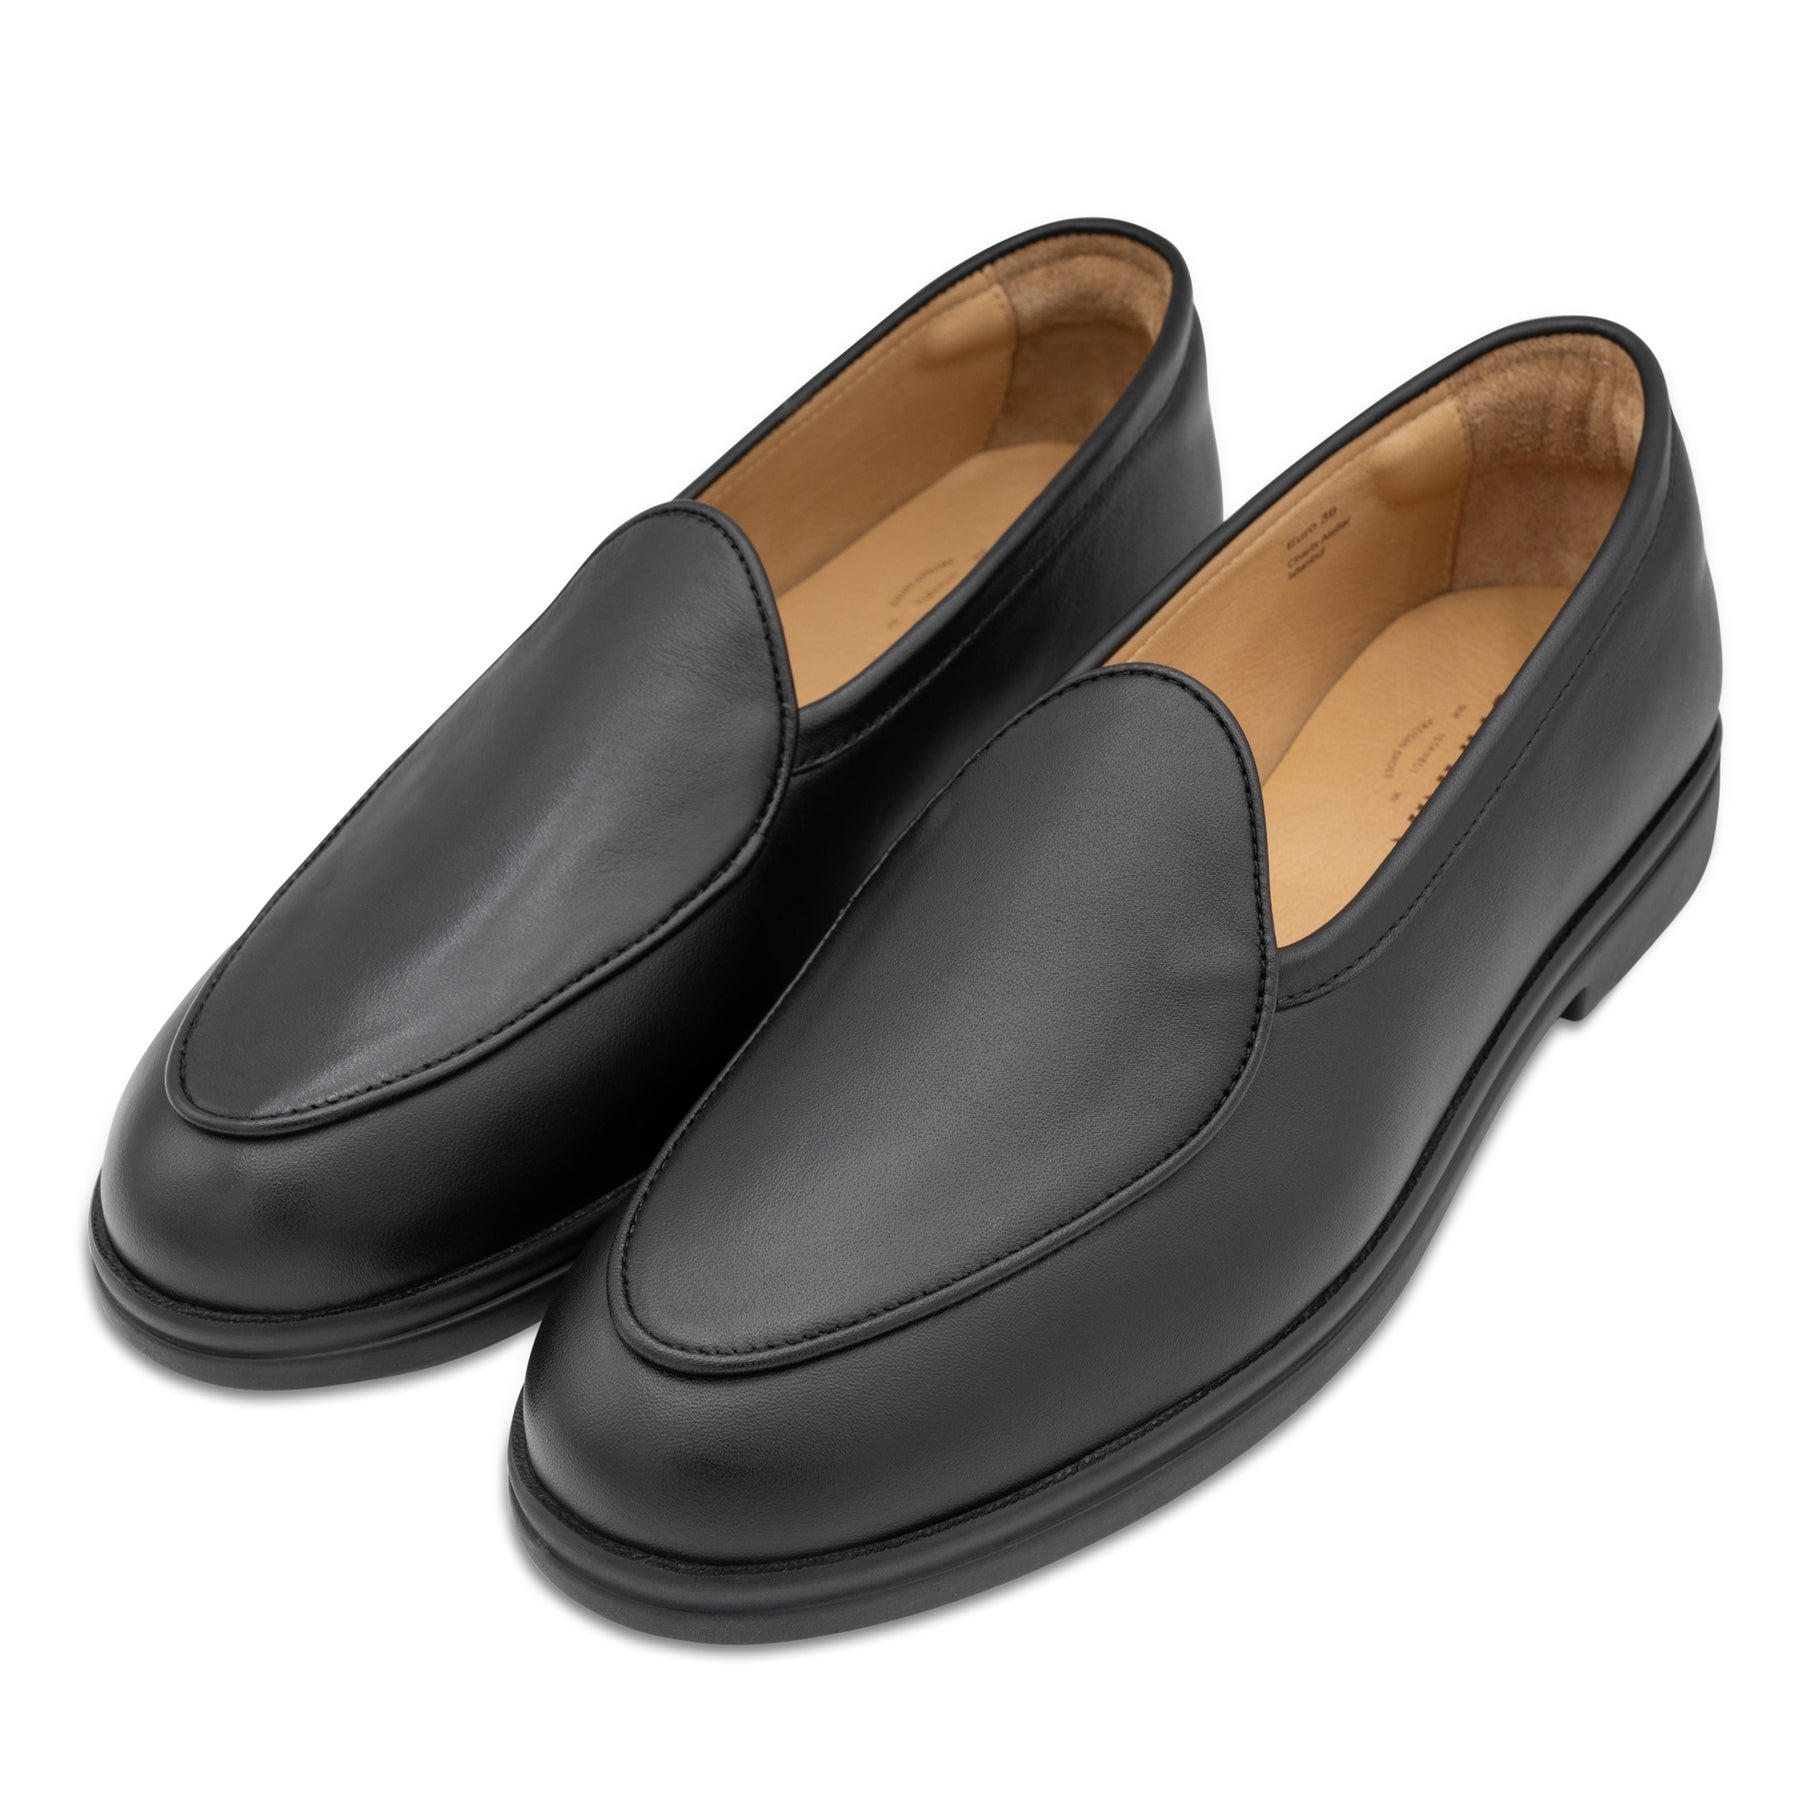 Black Loafers - Charix Shoes